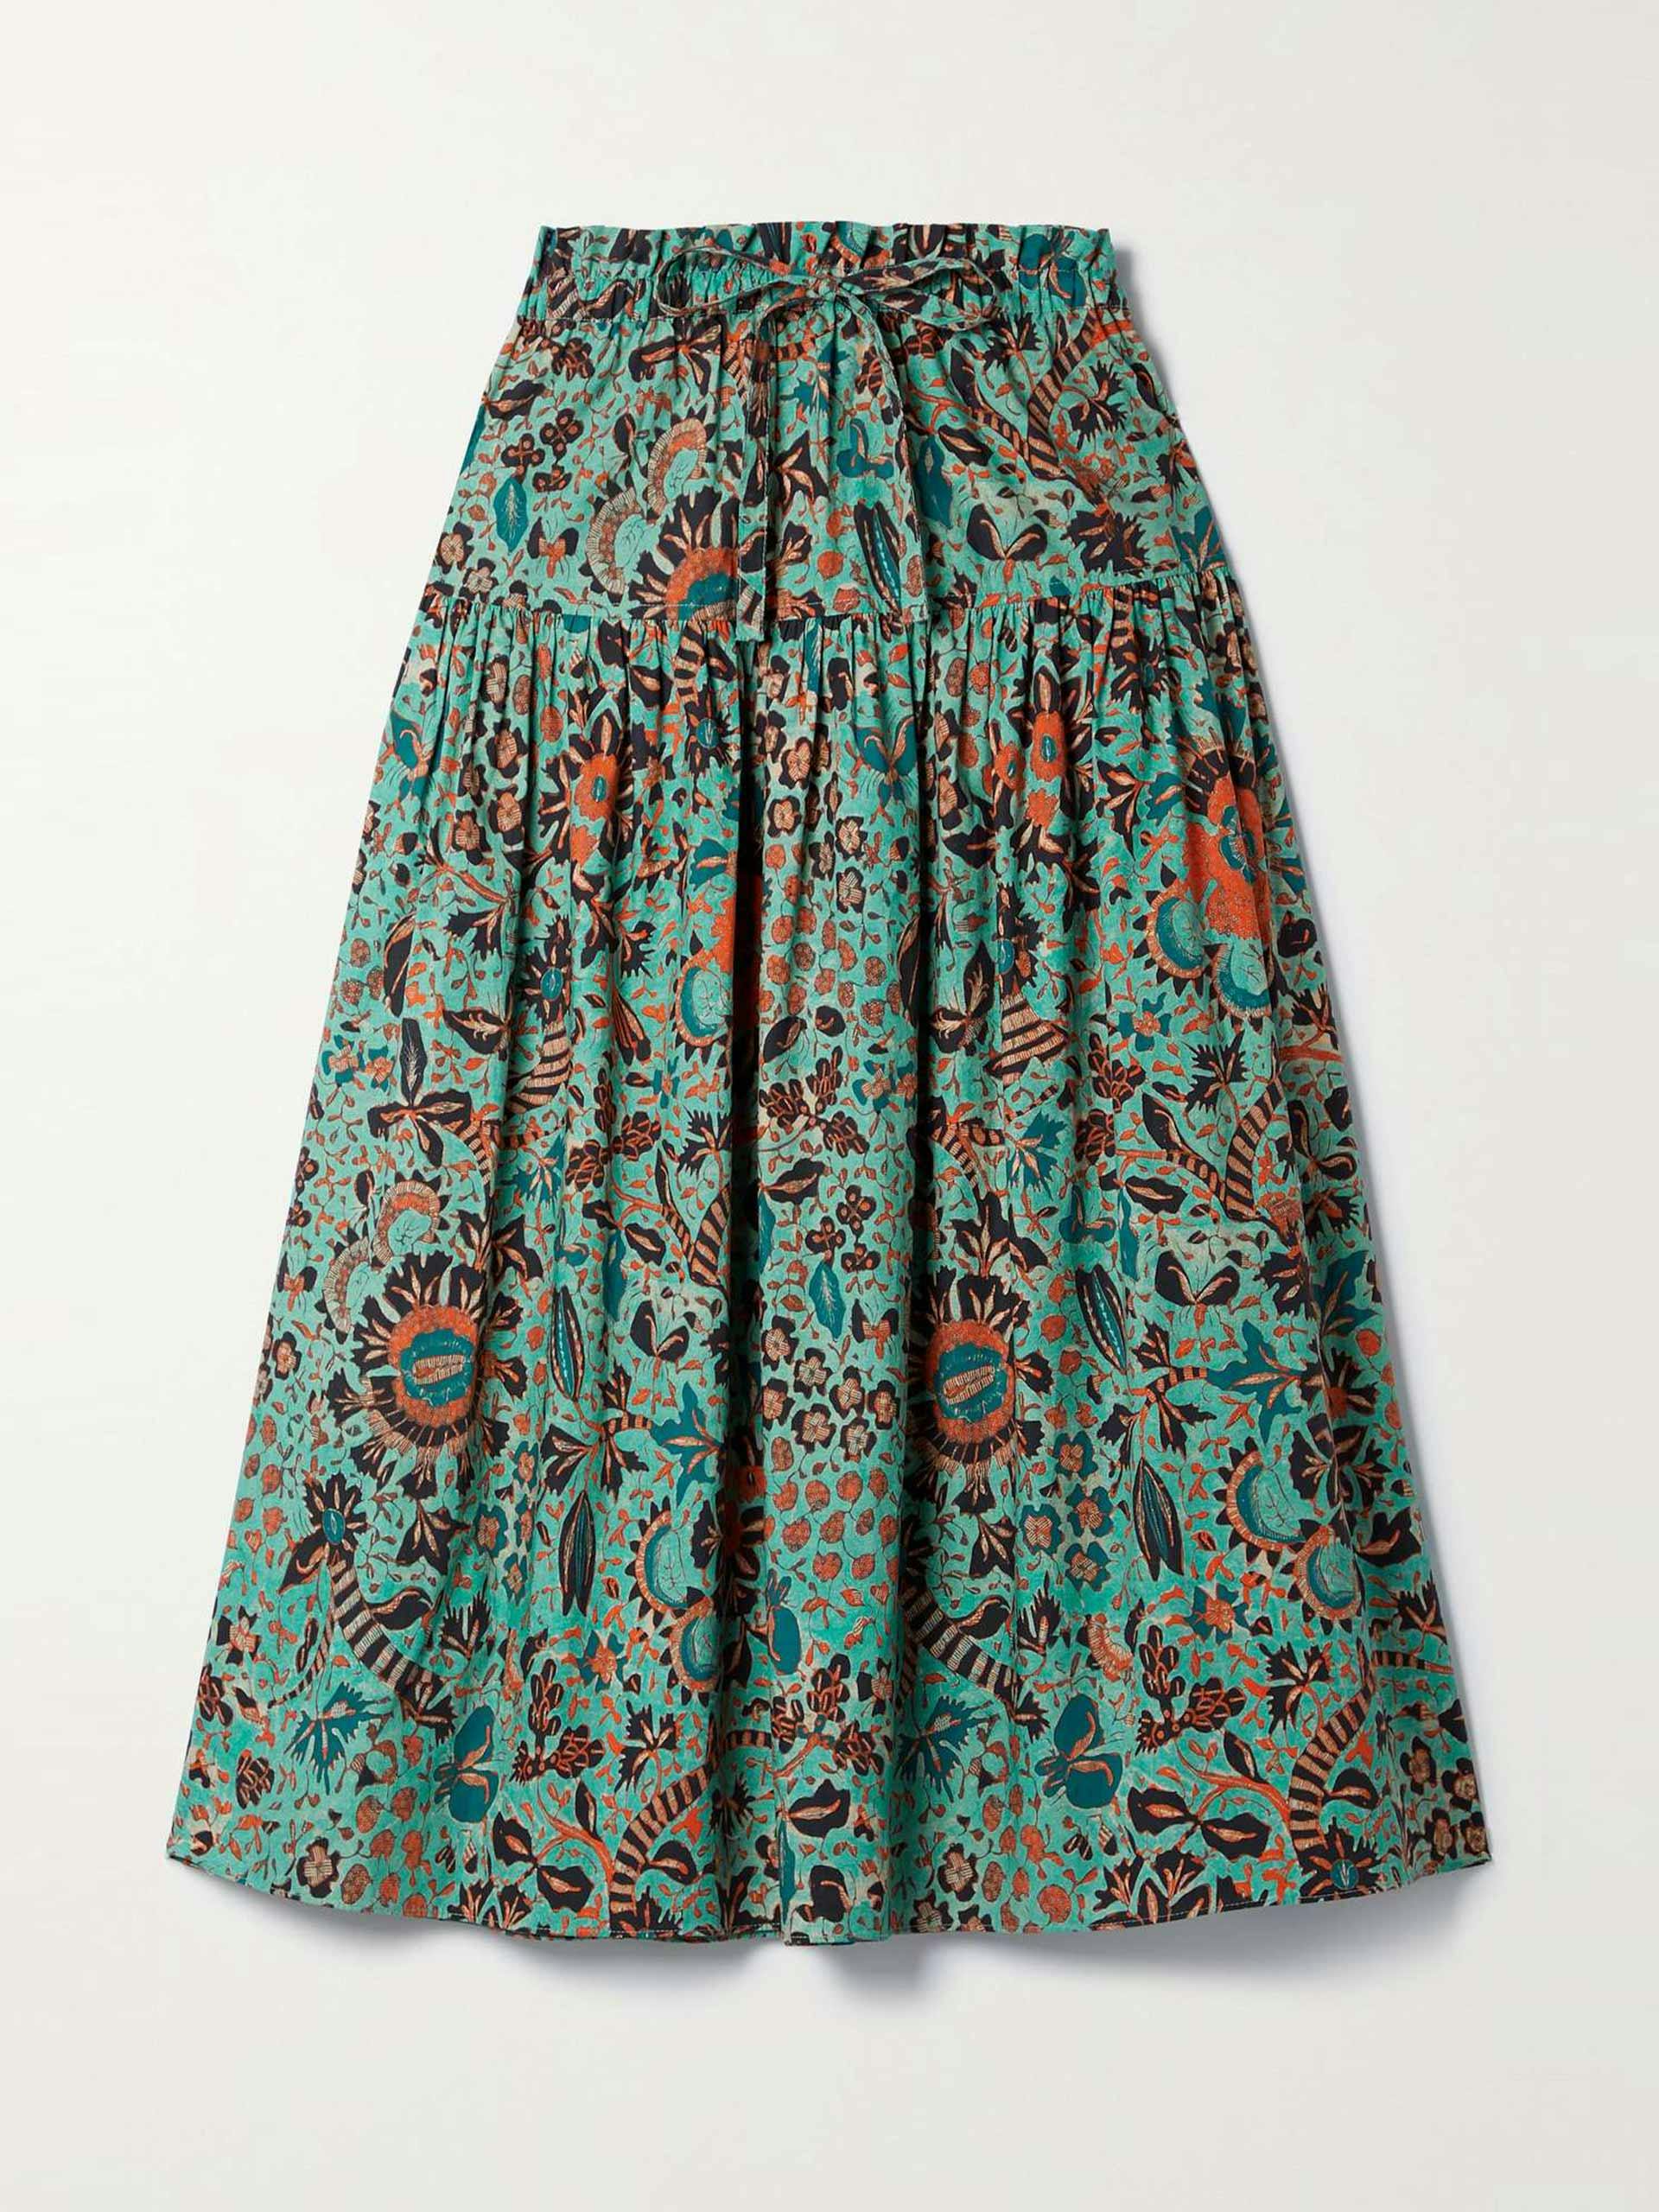 Green floral tiered midi skirt